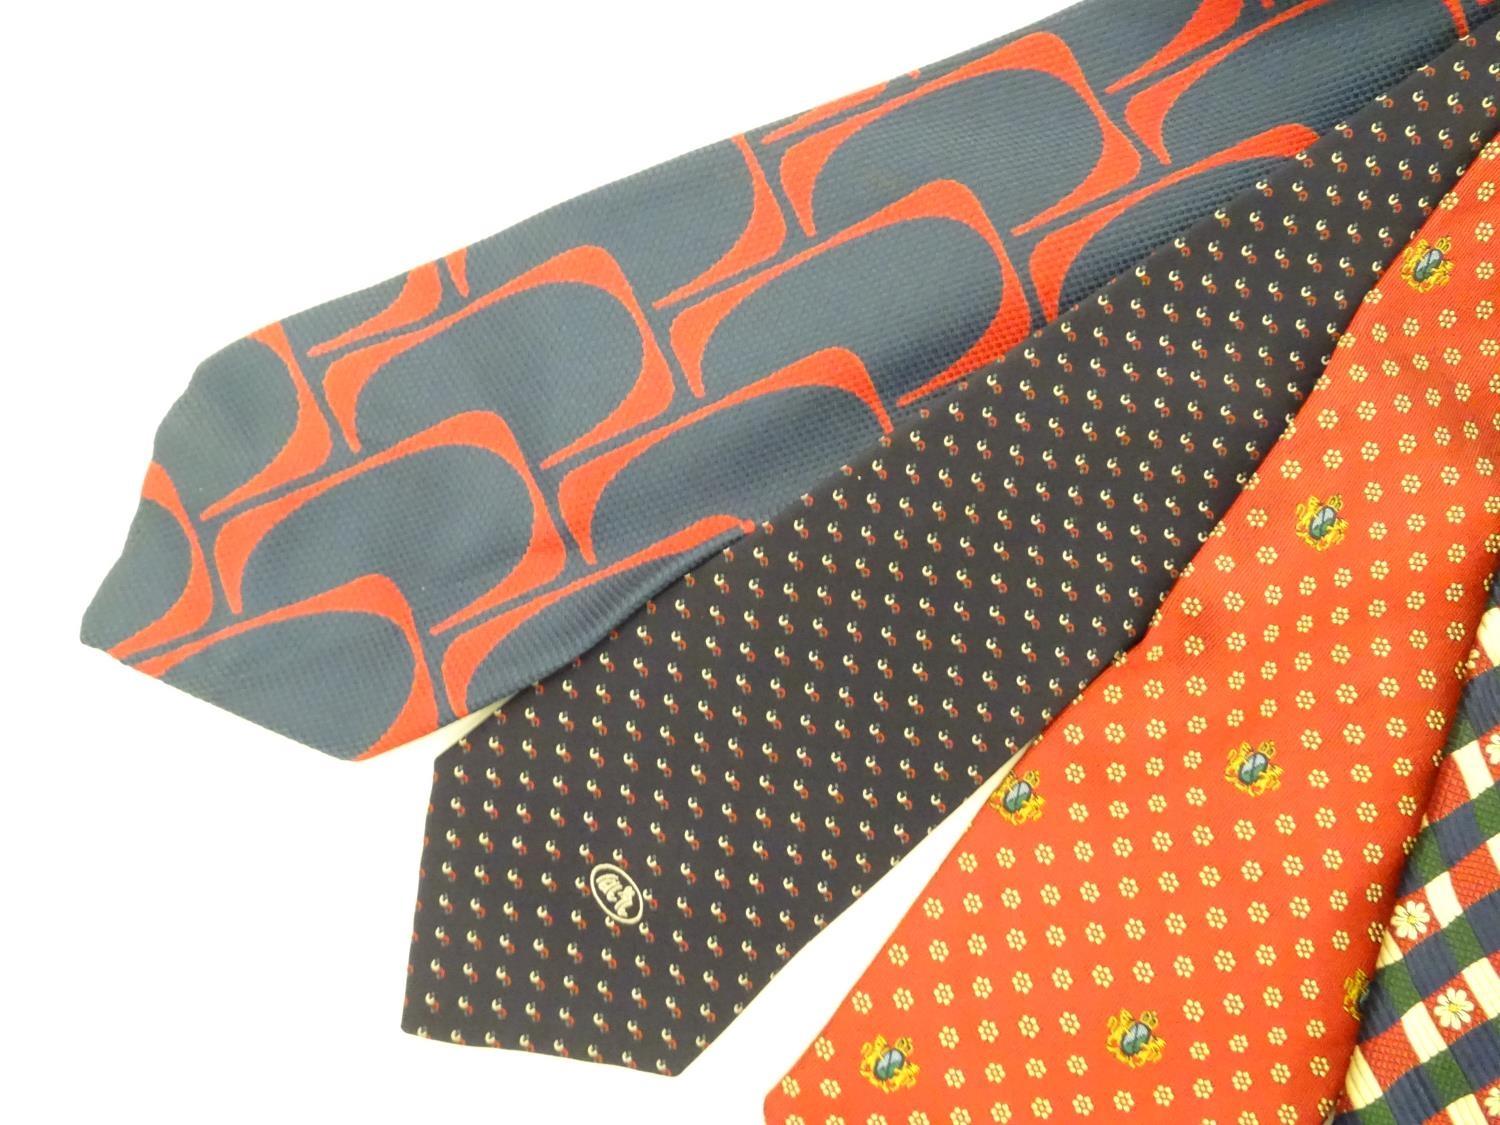 6 silk ties in navy and reds by Austin Reed, Tittorio, Pink and John Harmer (6) Please Note - we - Image 3 of 9